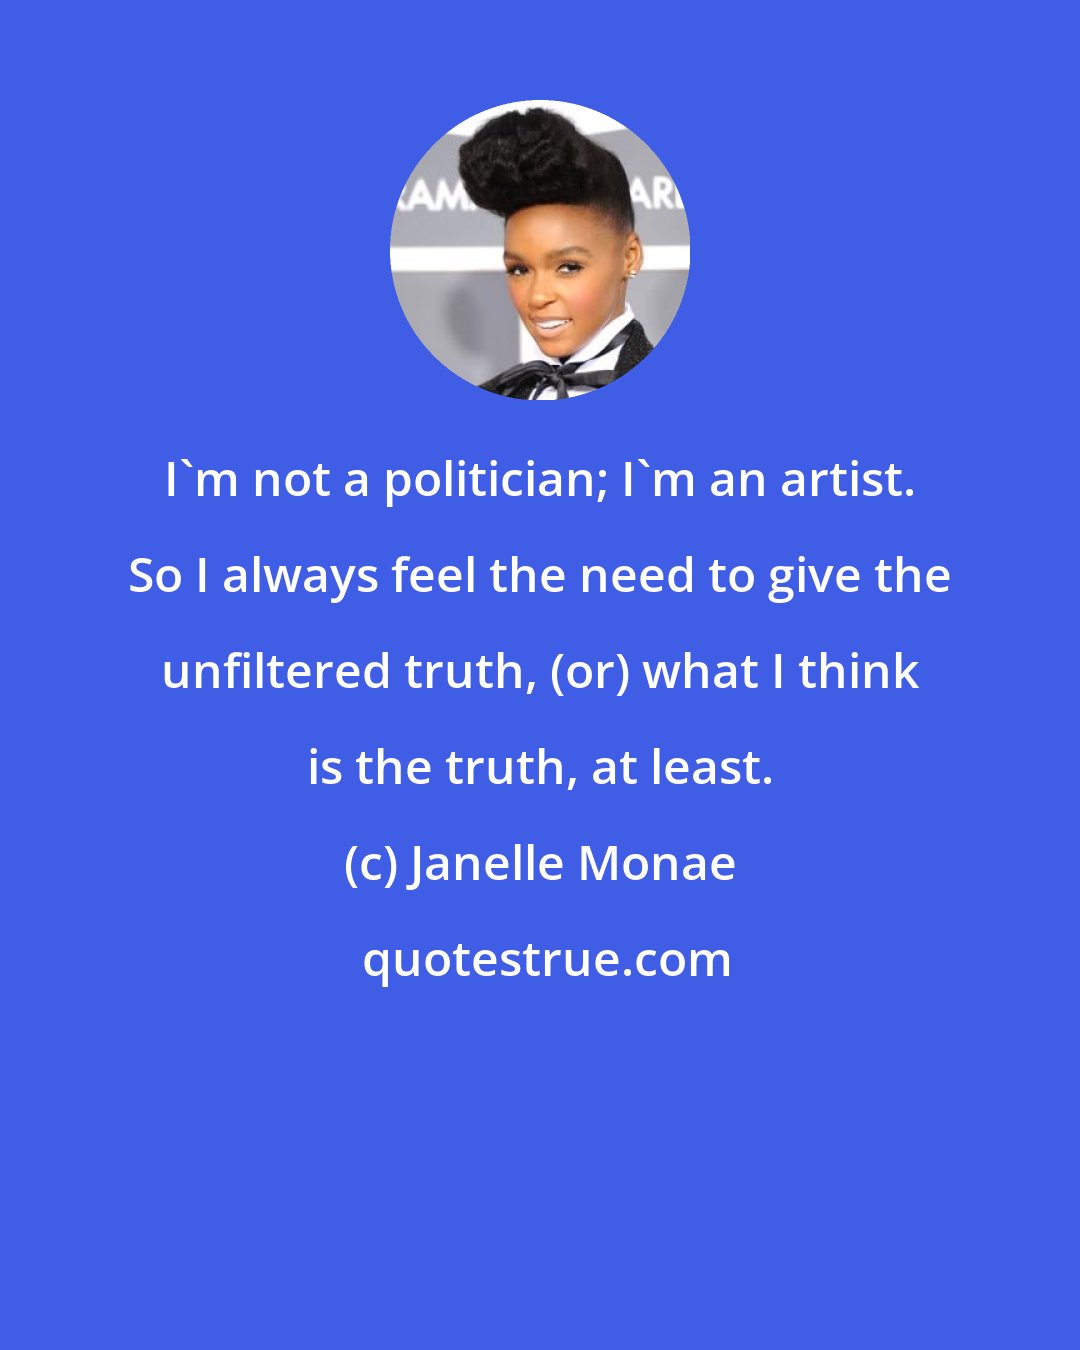 Janelle Monae: I'm not a politician; I'm an artist. So I always feel the need to give the unfiltered truth, (or) what I think is the truth, at least.